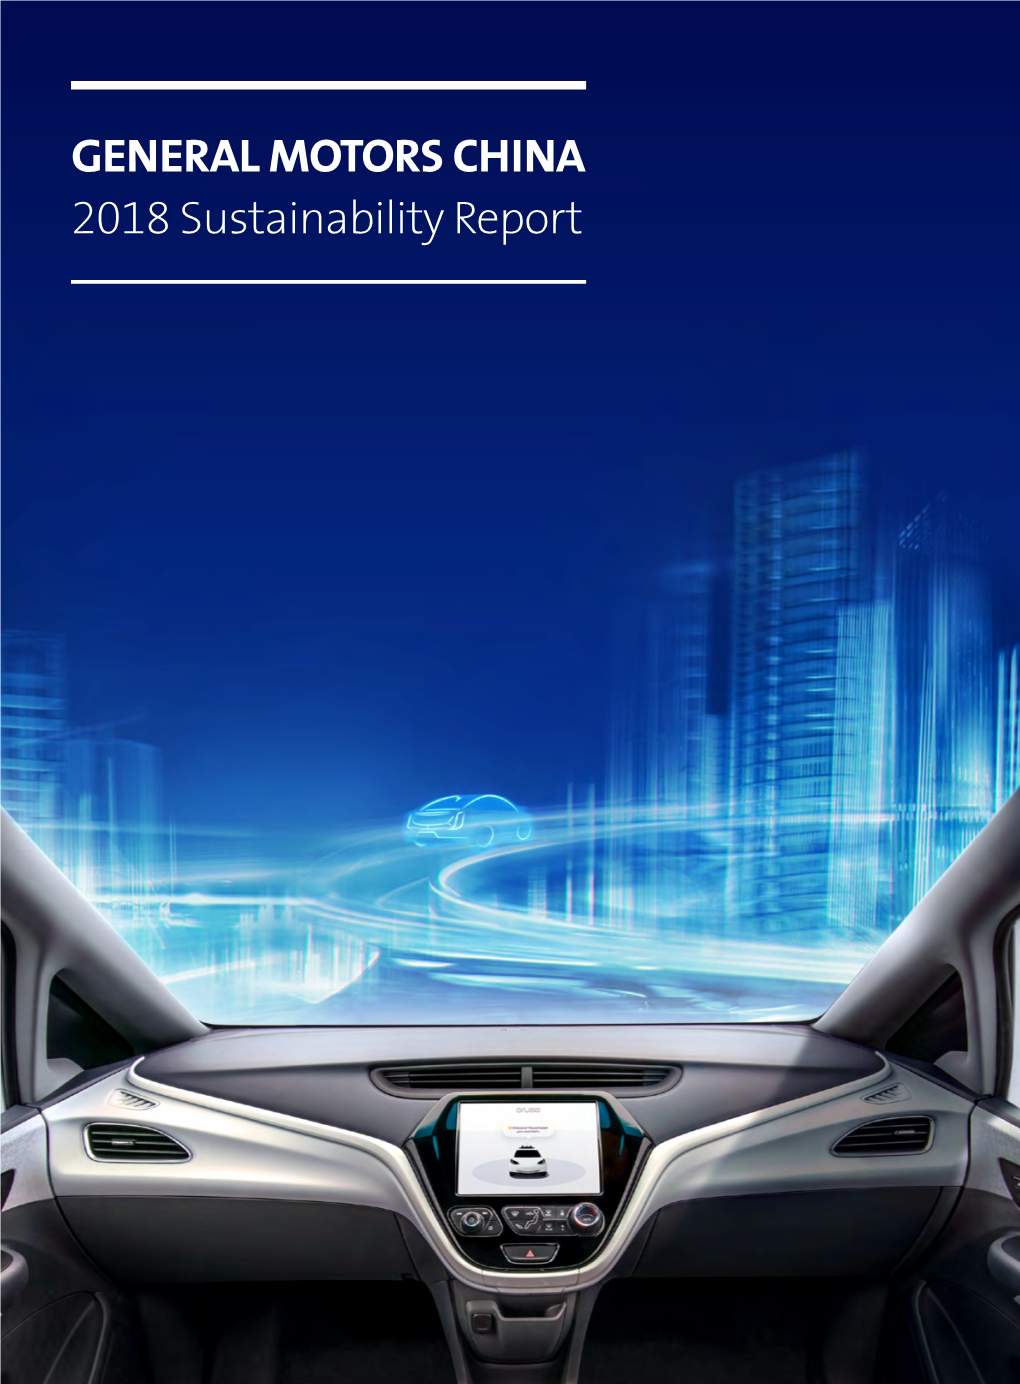 GENERAL MOTORS CHINA 2018 Sustainability Report for Years, We Have Said That the Auto Industry Is Experiencing More Change Today Than in the Past 50 Years